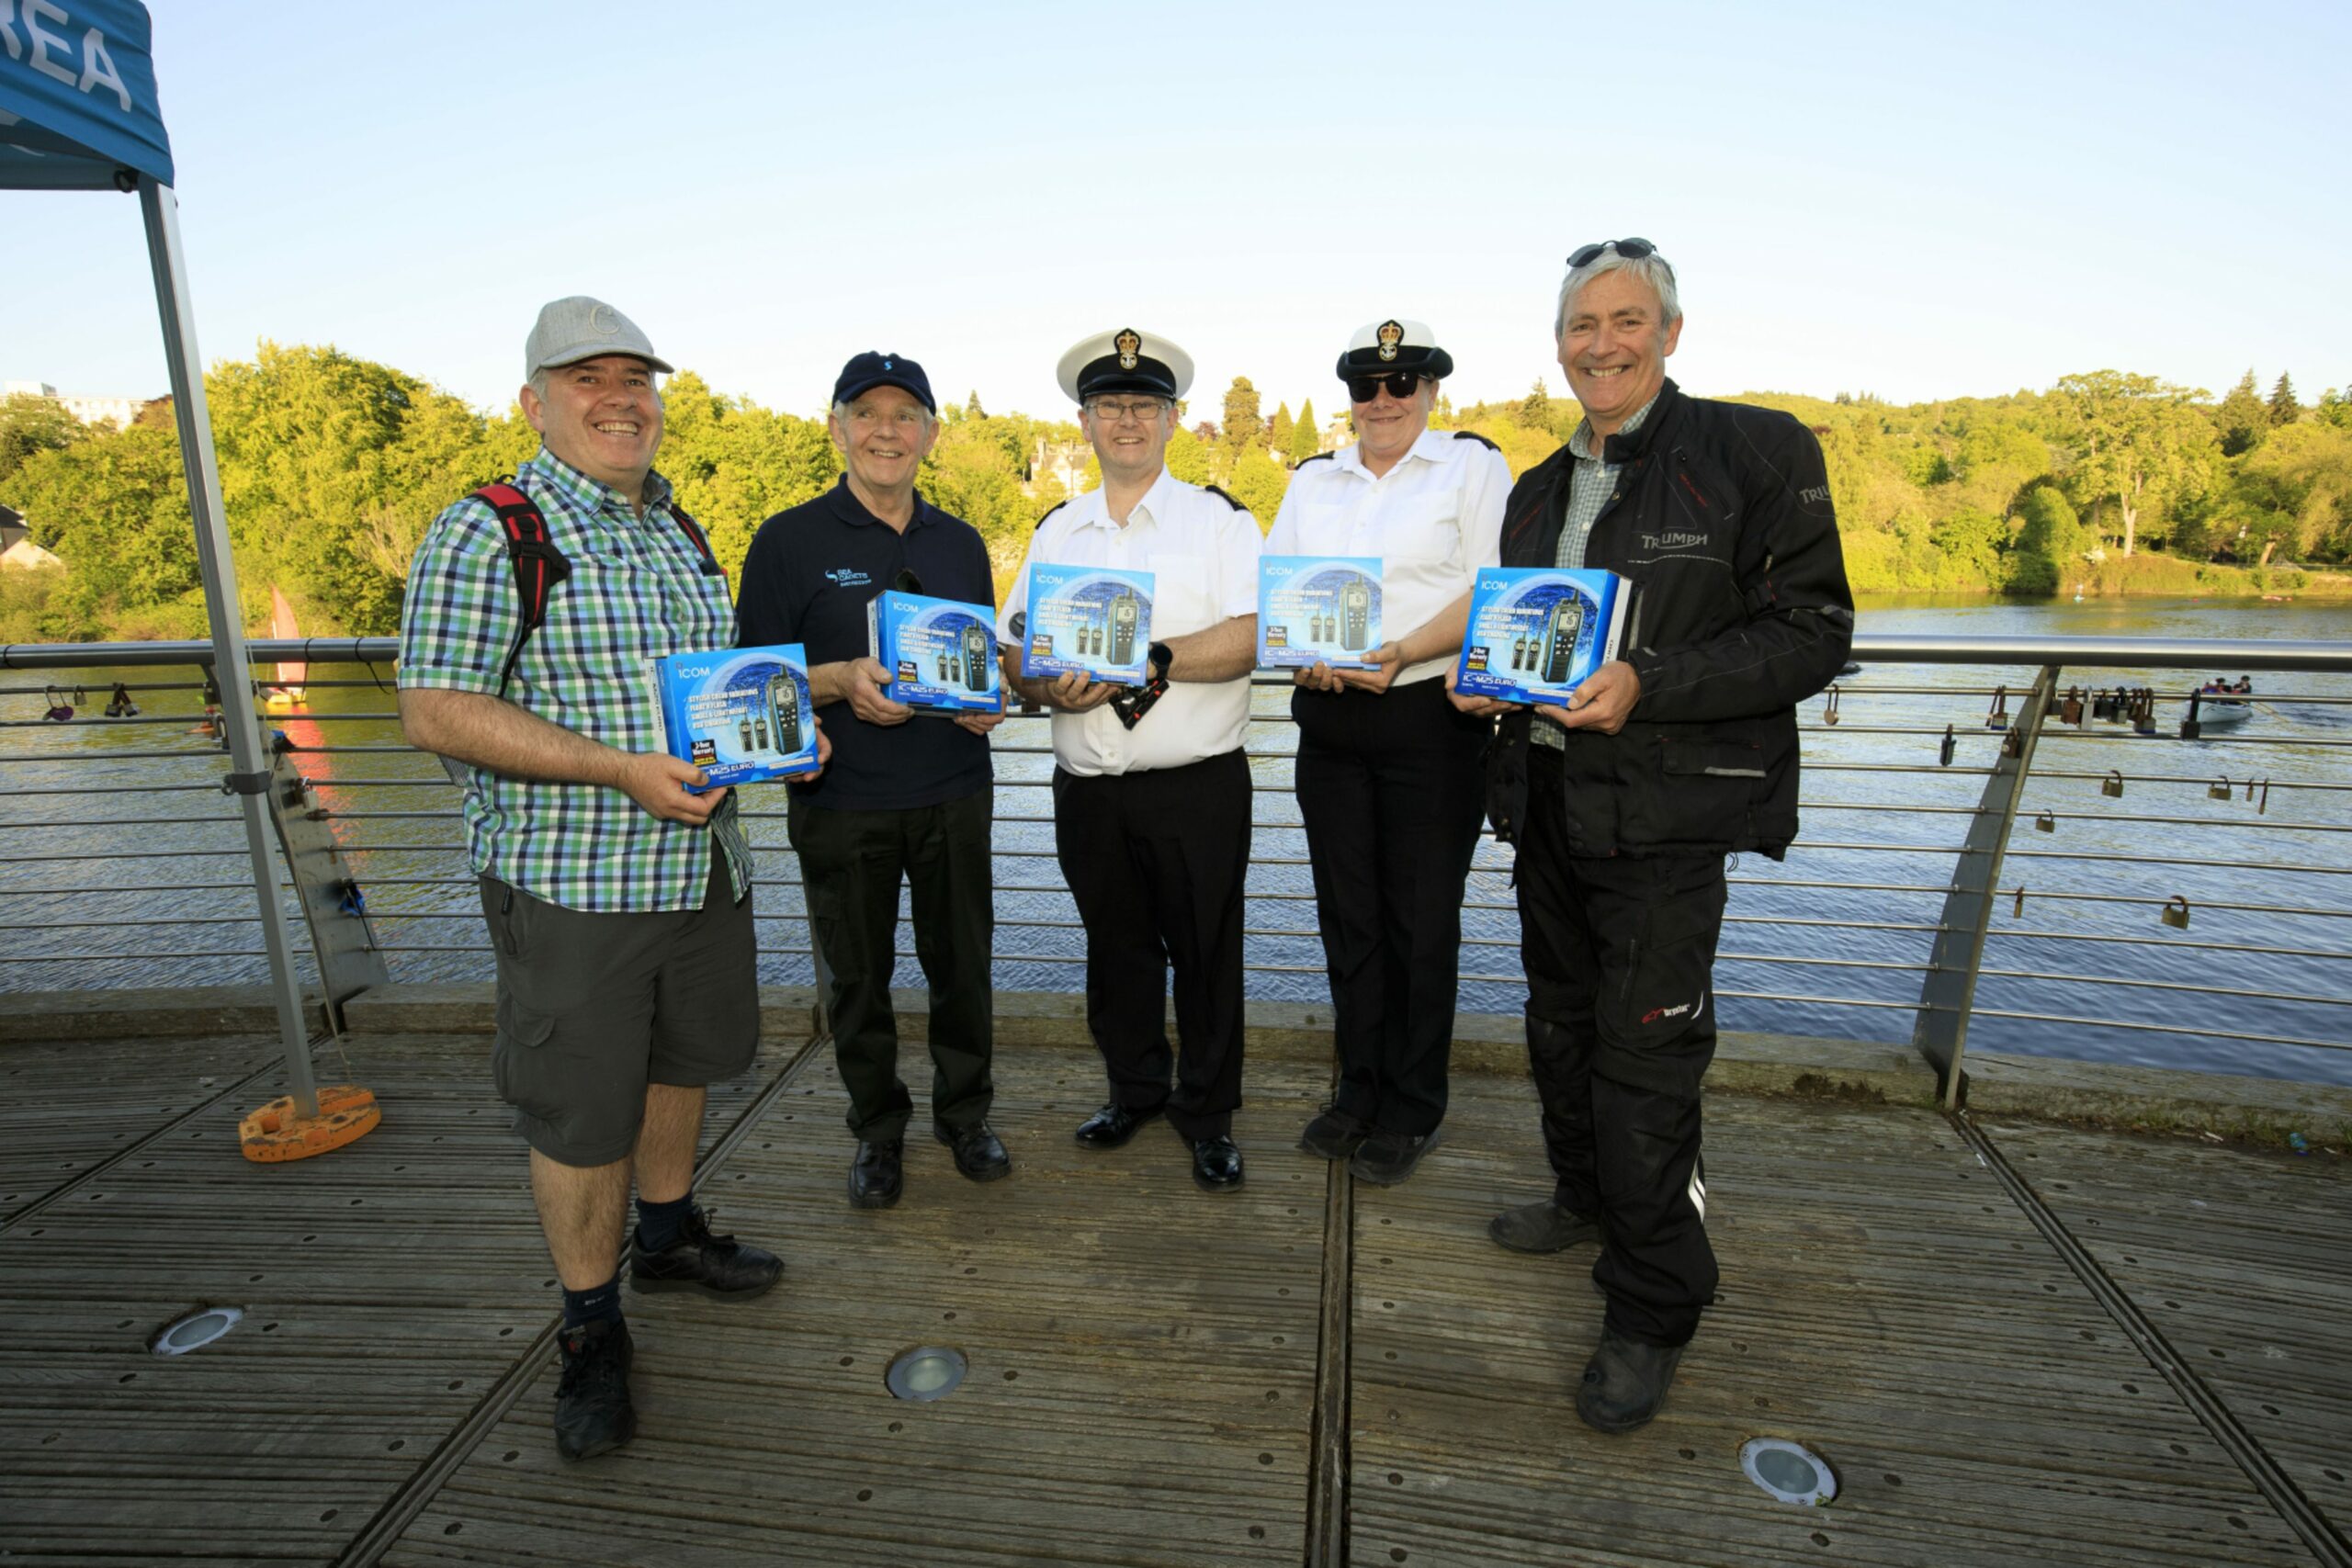 Portable marine VHF transceivers were donated to several organisations involved in water Sports by The River Tay Community Sports Hub. Pictured are Mark Doris from Perth Sub-Aqua Club, Bob Shaw from River Tay Community Sports Hub, Neil Hardie, Fiona Laing from Perth Sea Cadets and Grant Stewart from Carse Canoe Club.